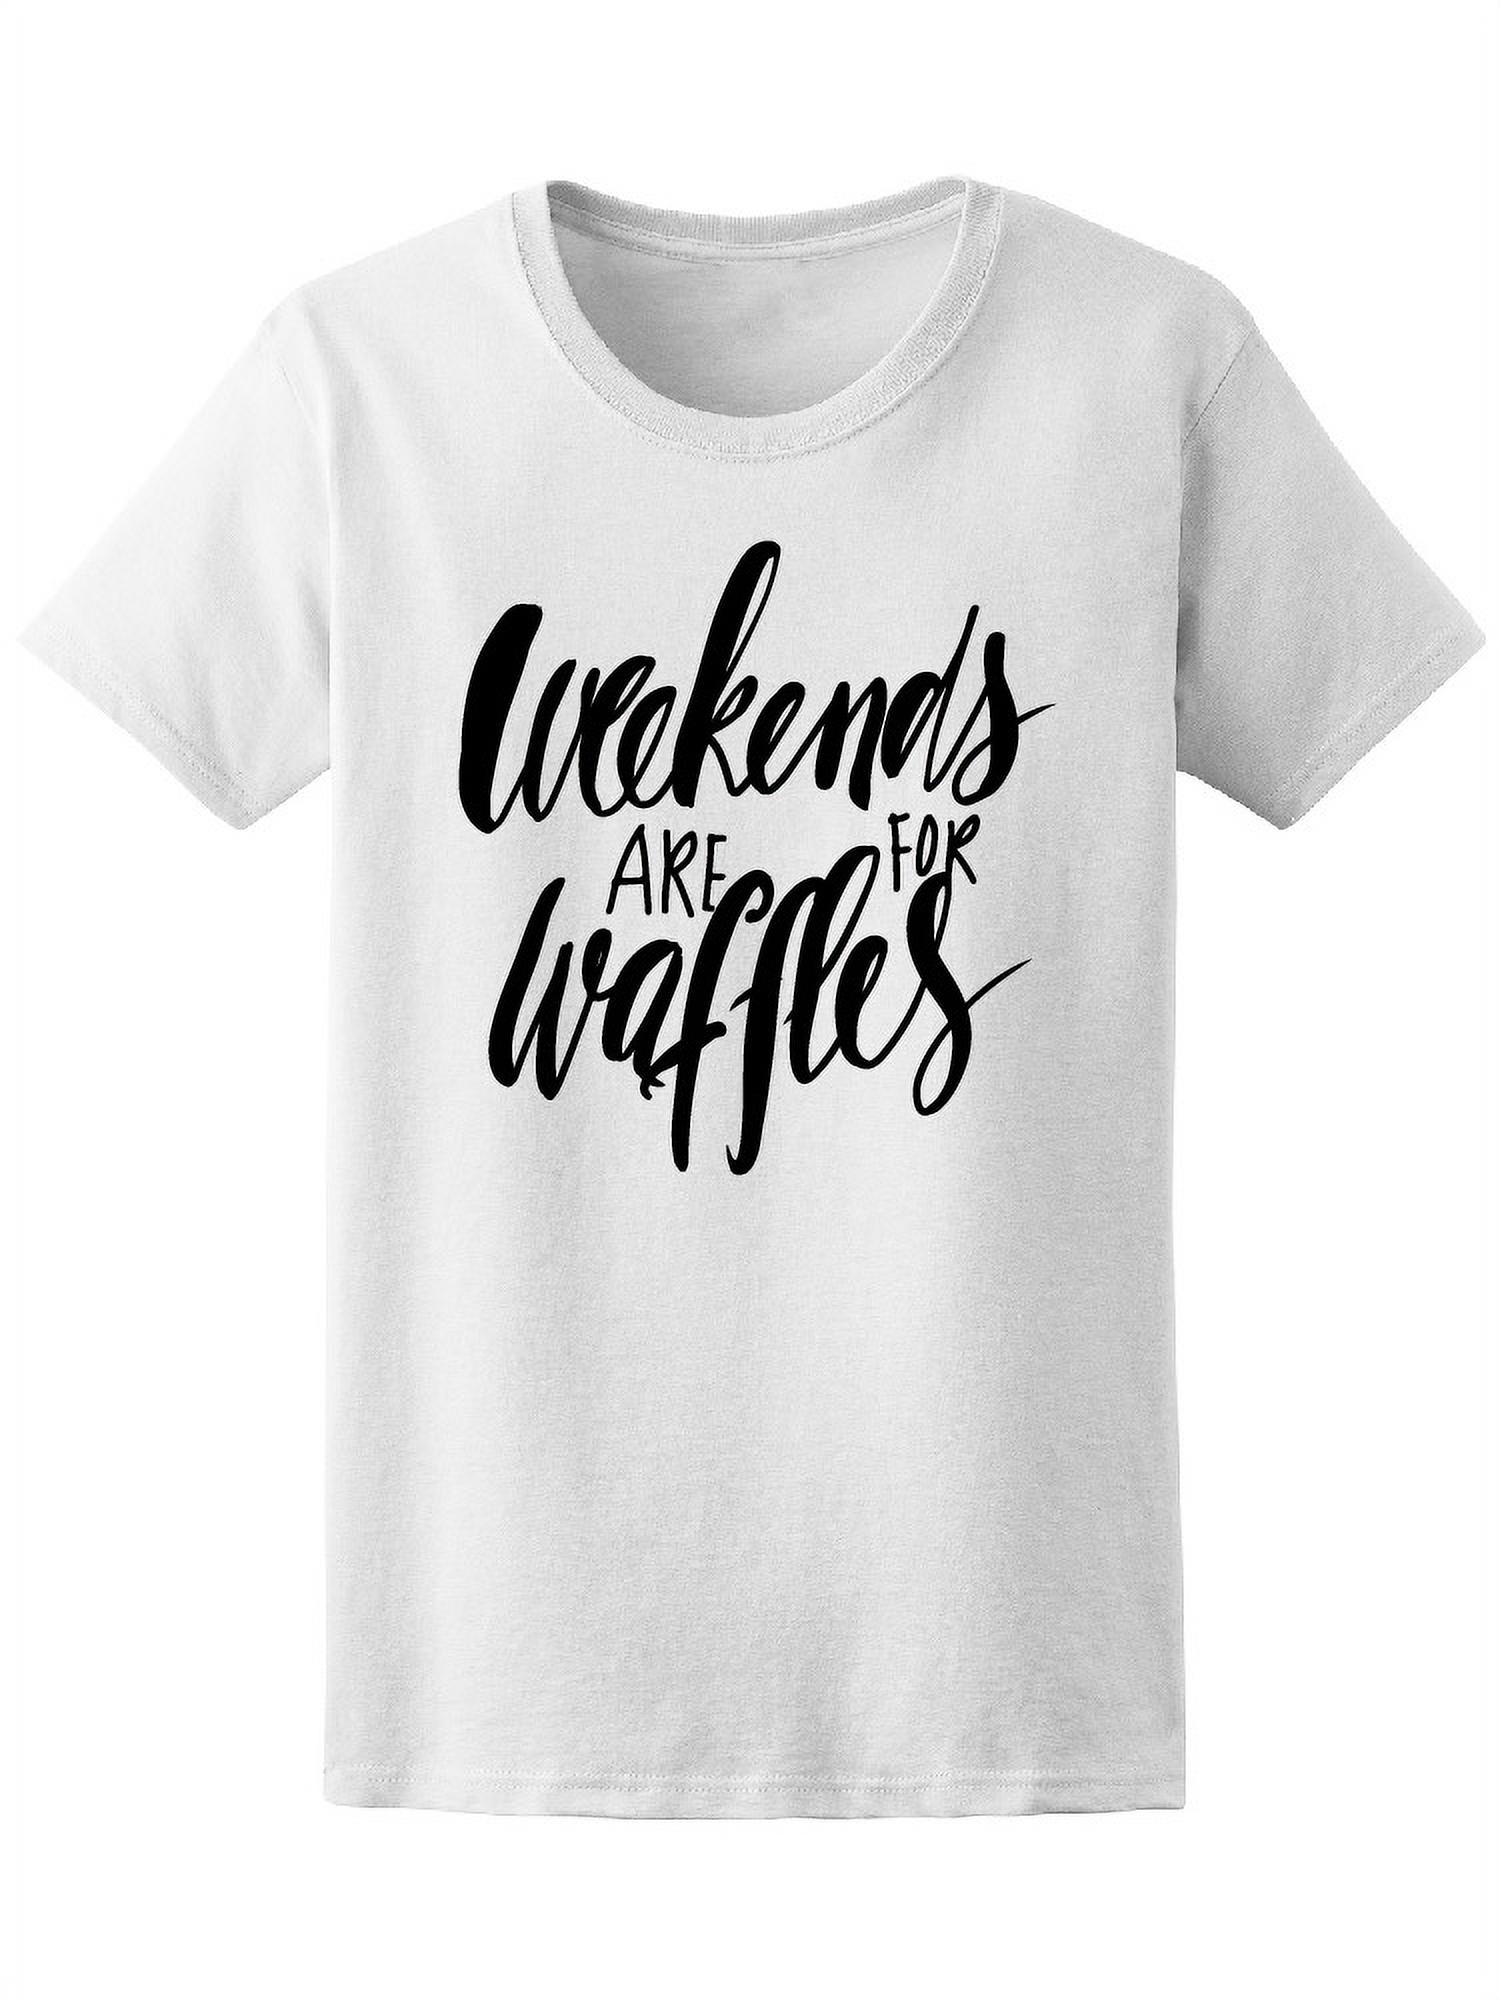 Weekends Are For Waffles T-Shirt Women -Image by Shutterstock, Female Small - image 1 of 2